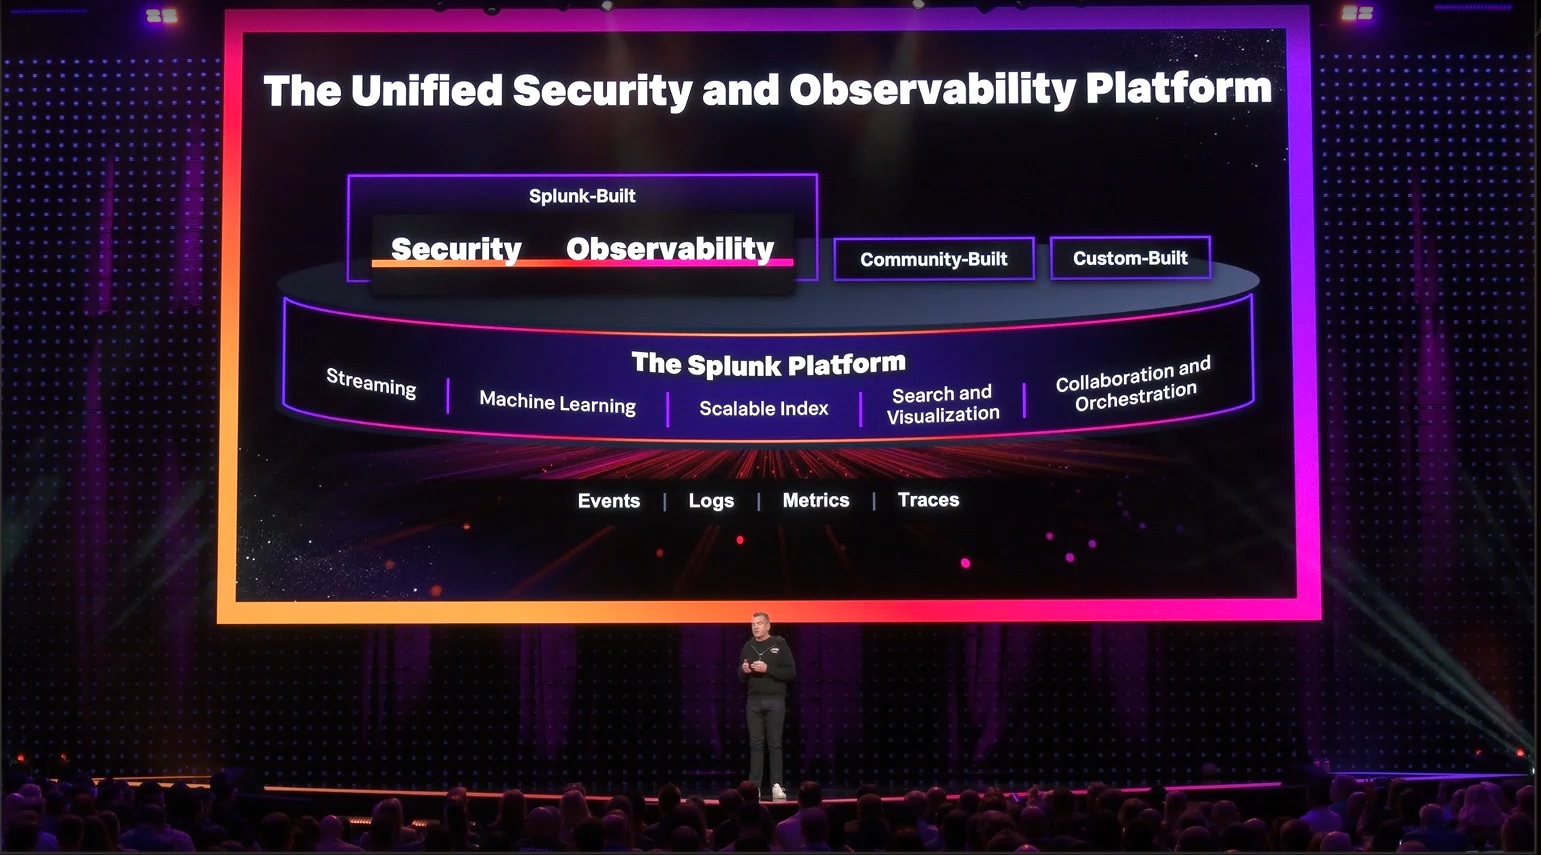 Major Announcements From Splunk Bring Observability and Security to the Forefront